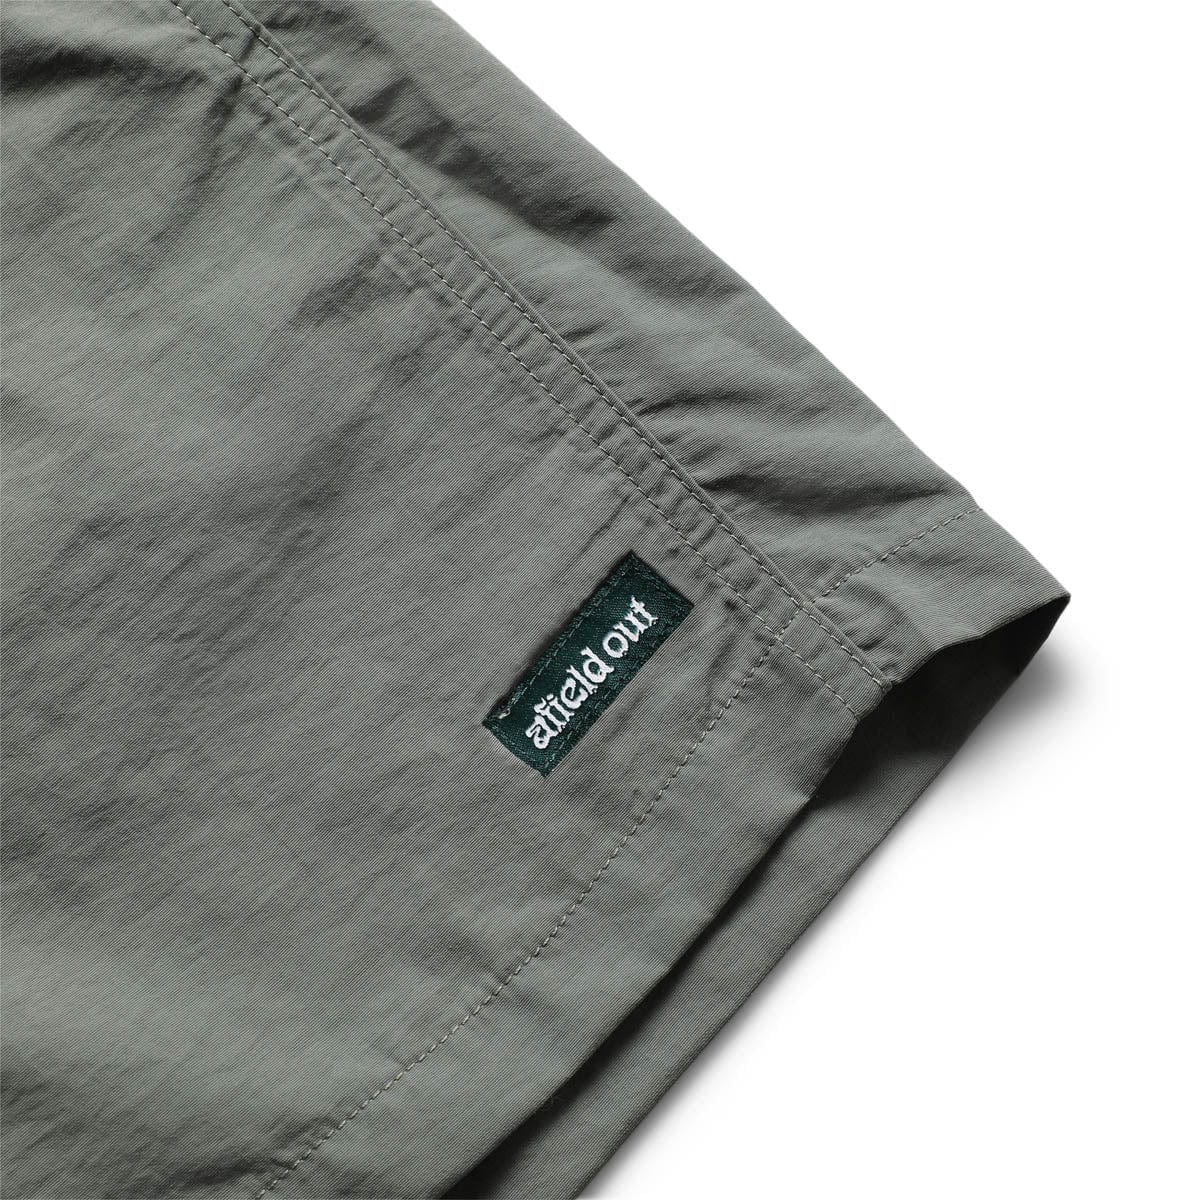 Afield Out Bottoms SAND/SAGE / M DUO TONE SIERRA CLIMBING SHORTS